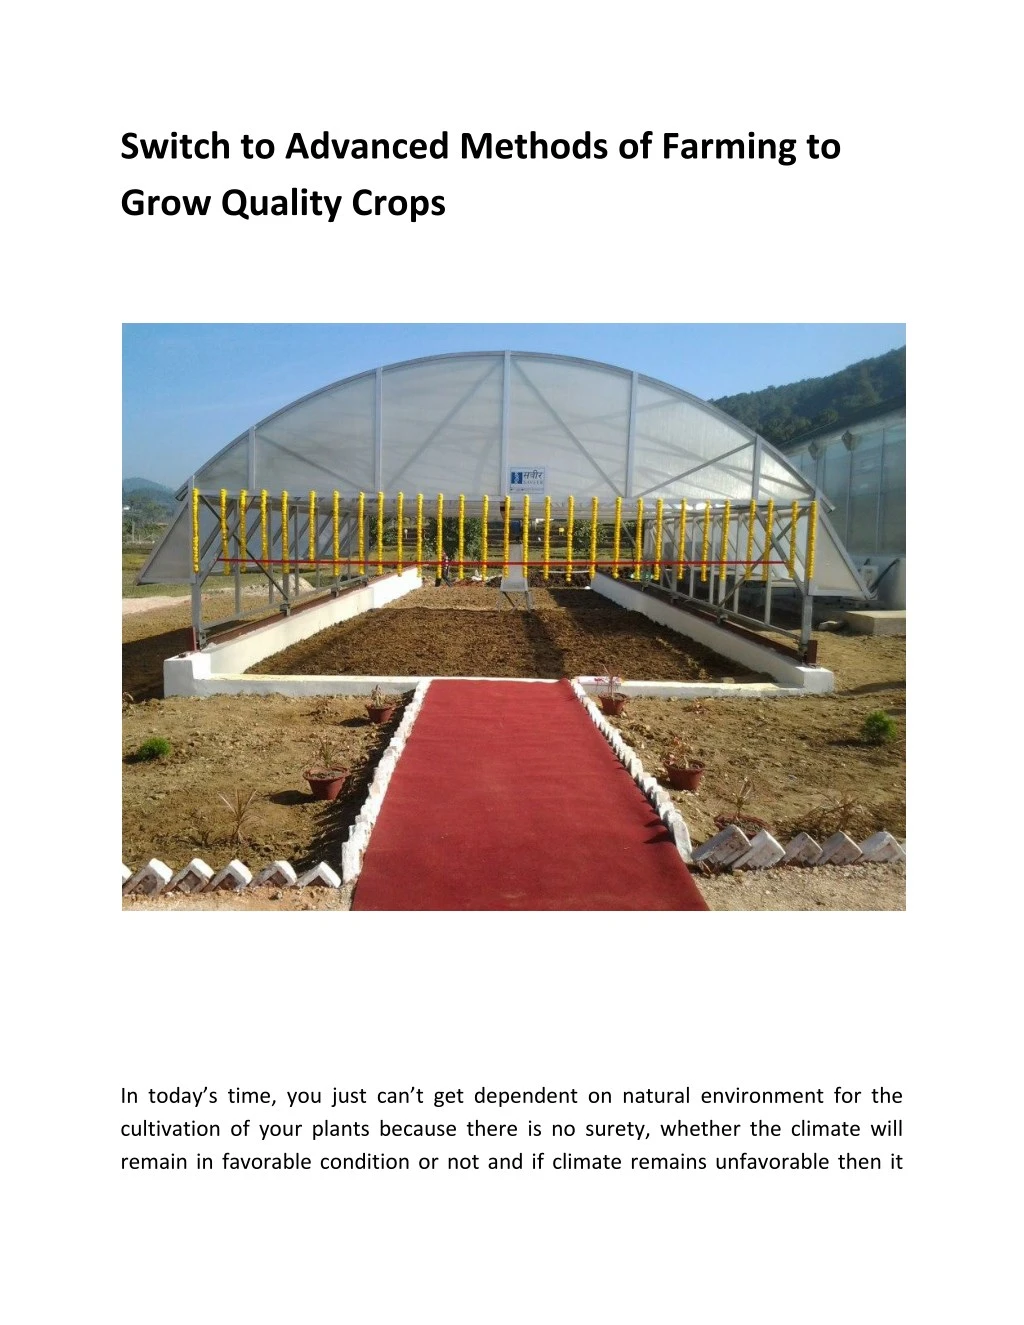 switch to advanced methods of farming to grow